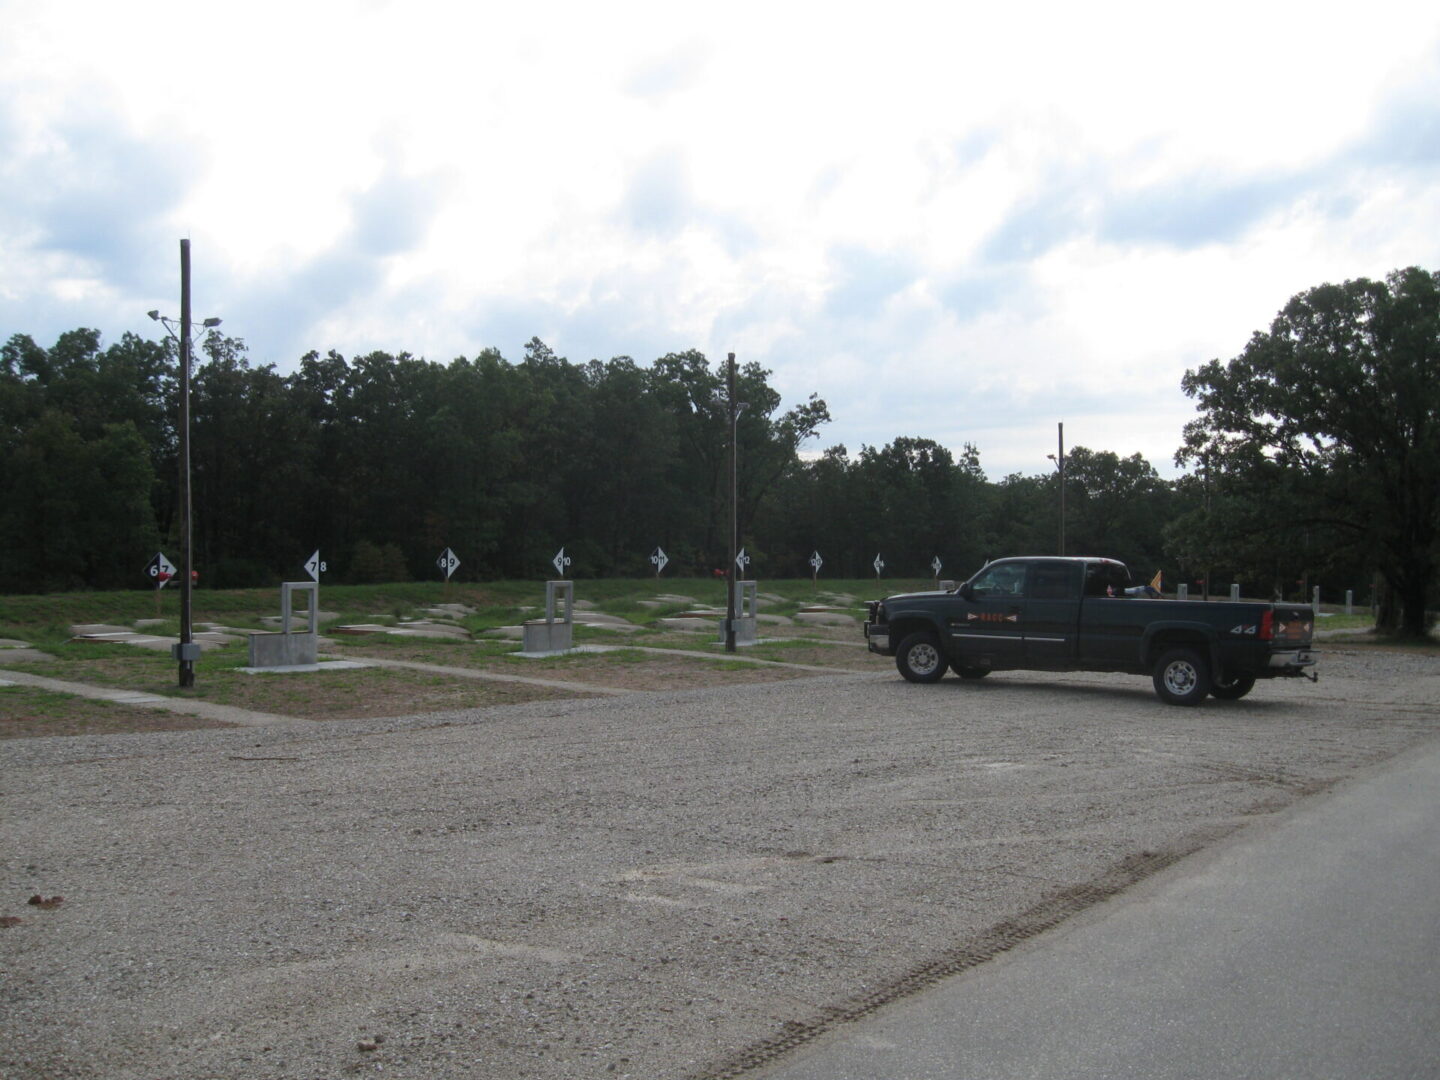 Pickup truck parked by a roadside near a series of memorial crosses.